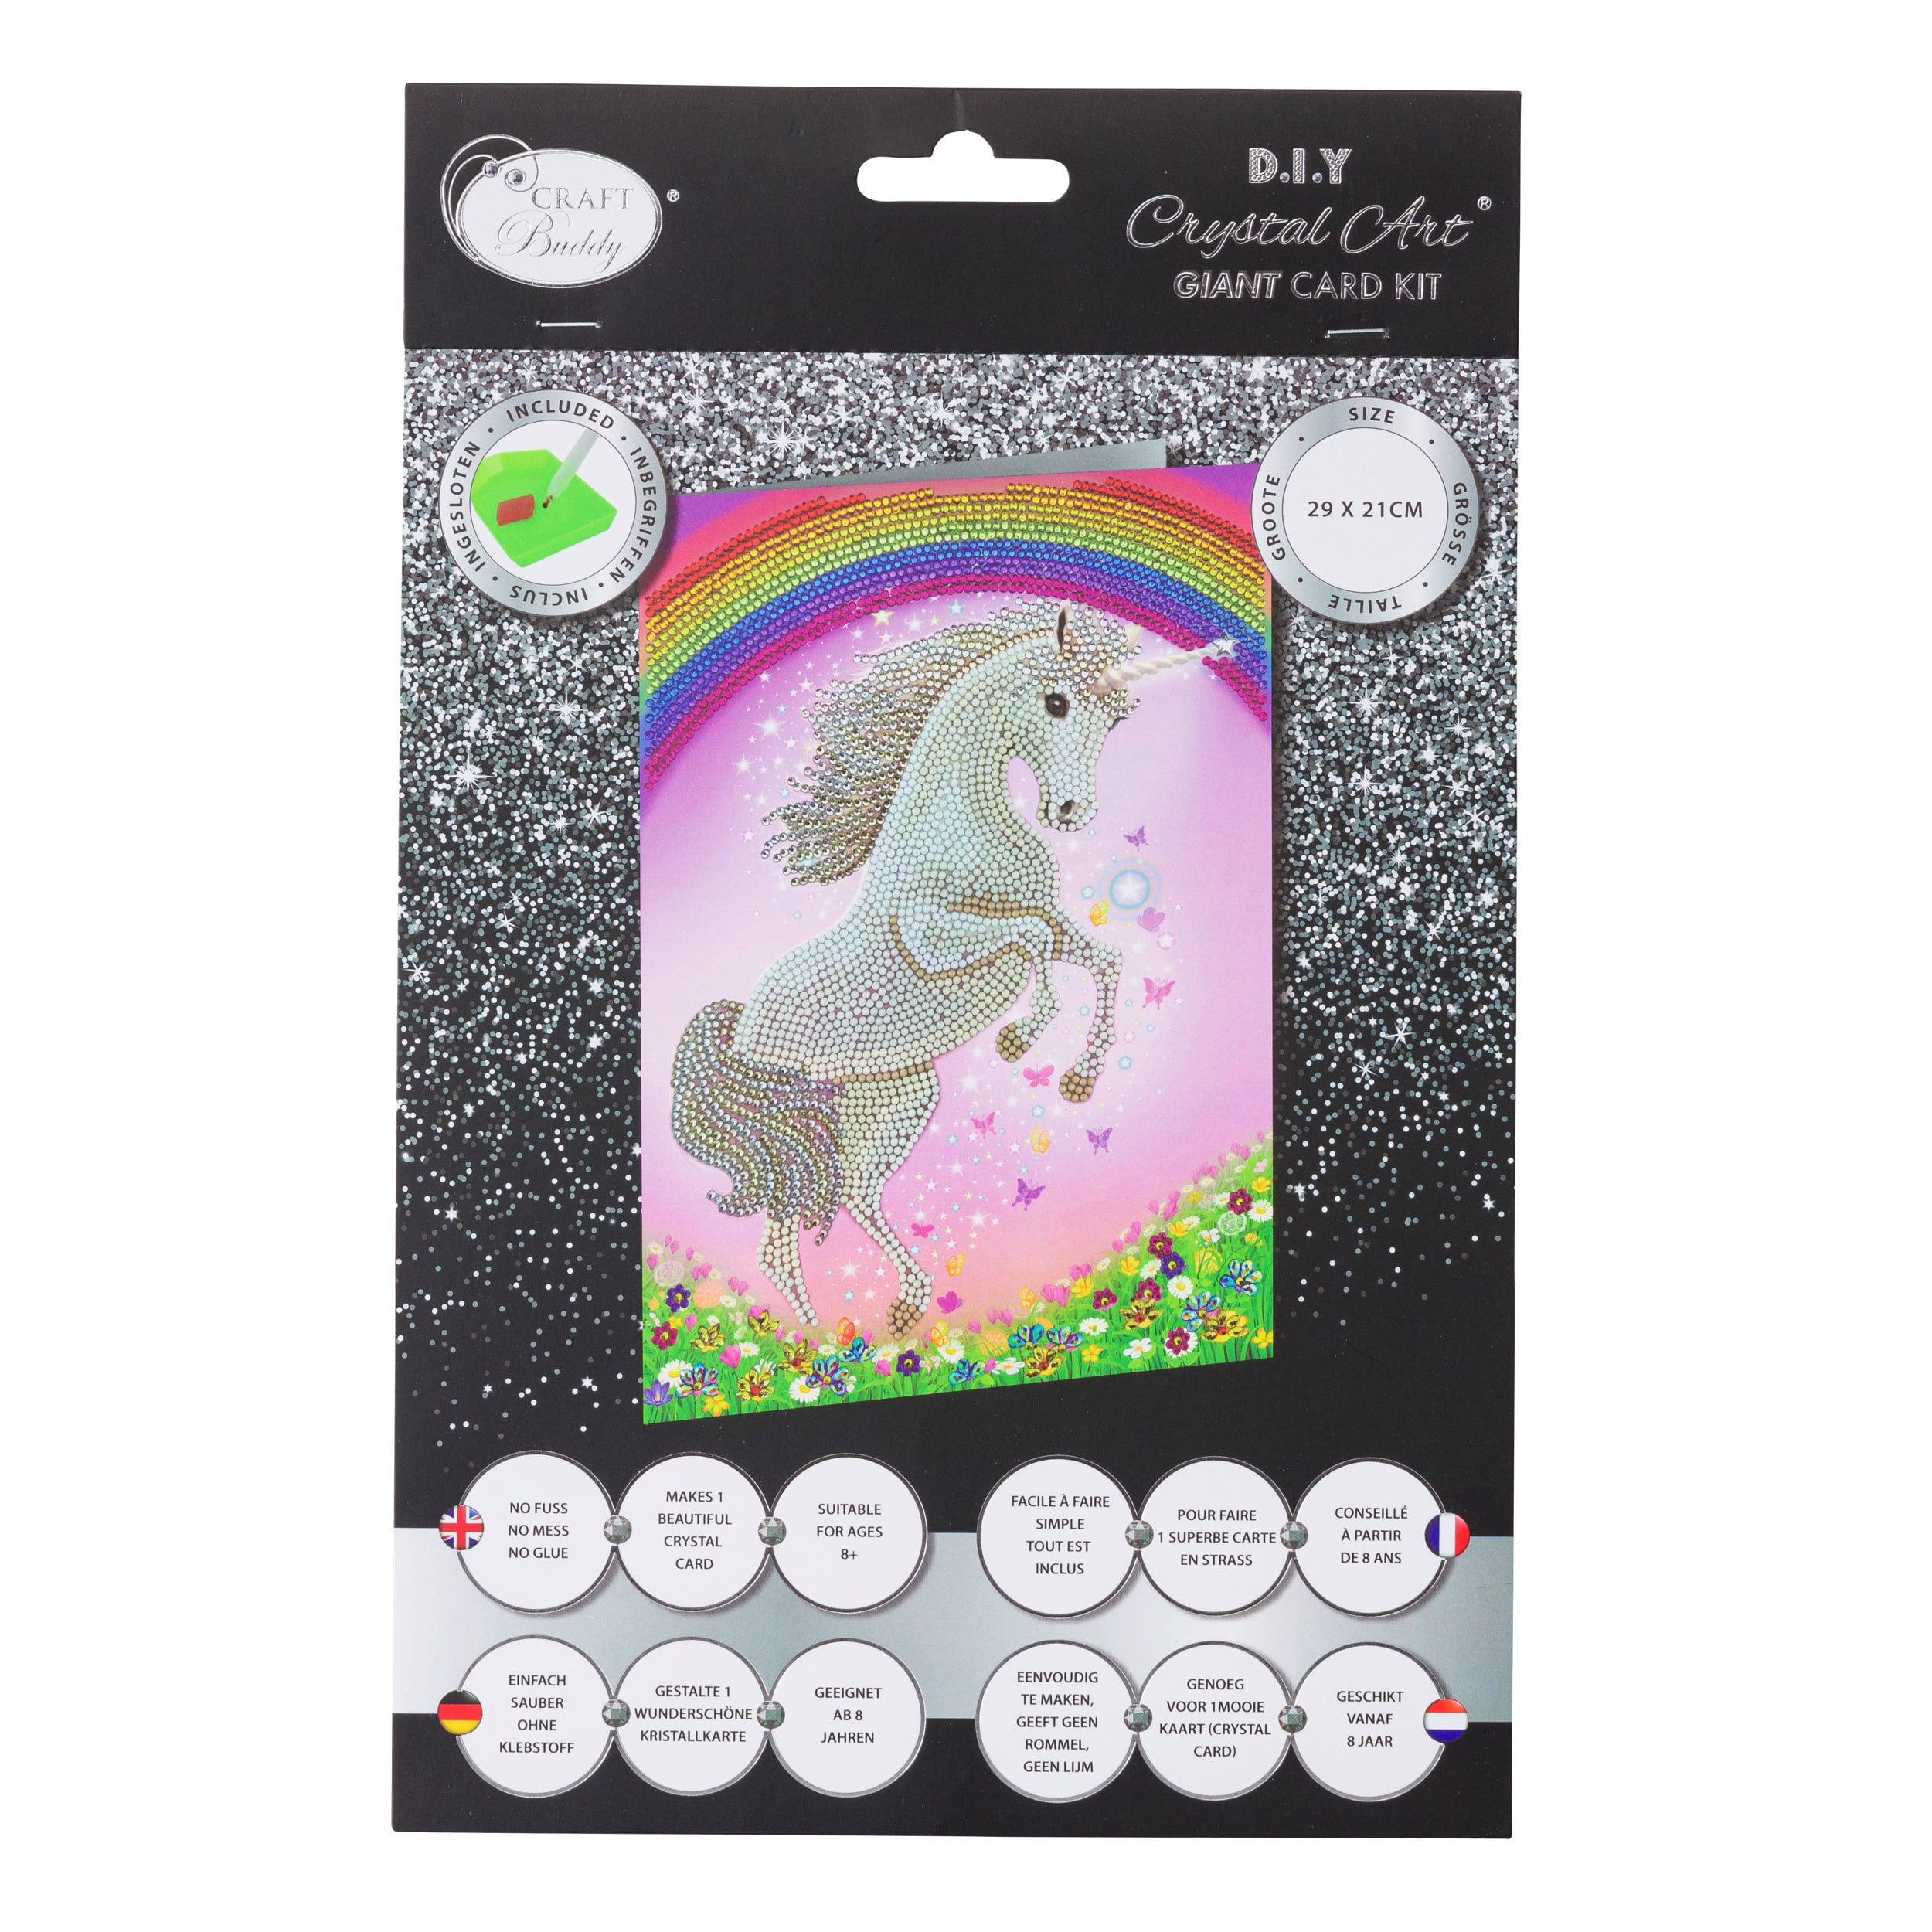 Crystal Art D.I.Y Picture Kit, Unicorn Forest by Craft Buddy FREE